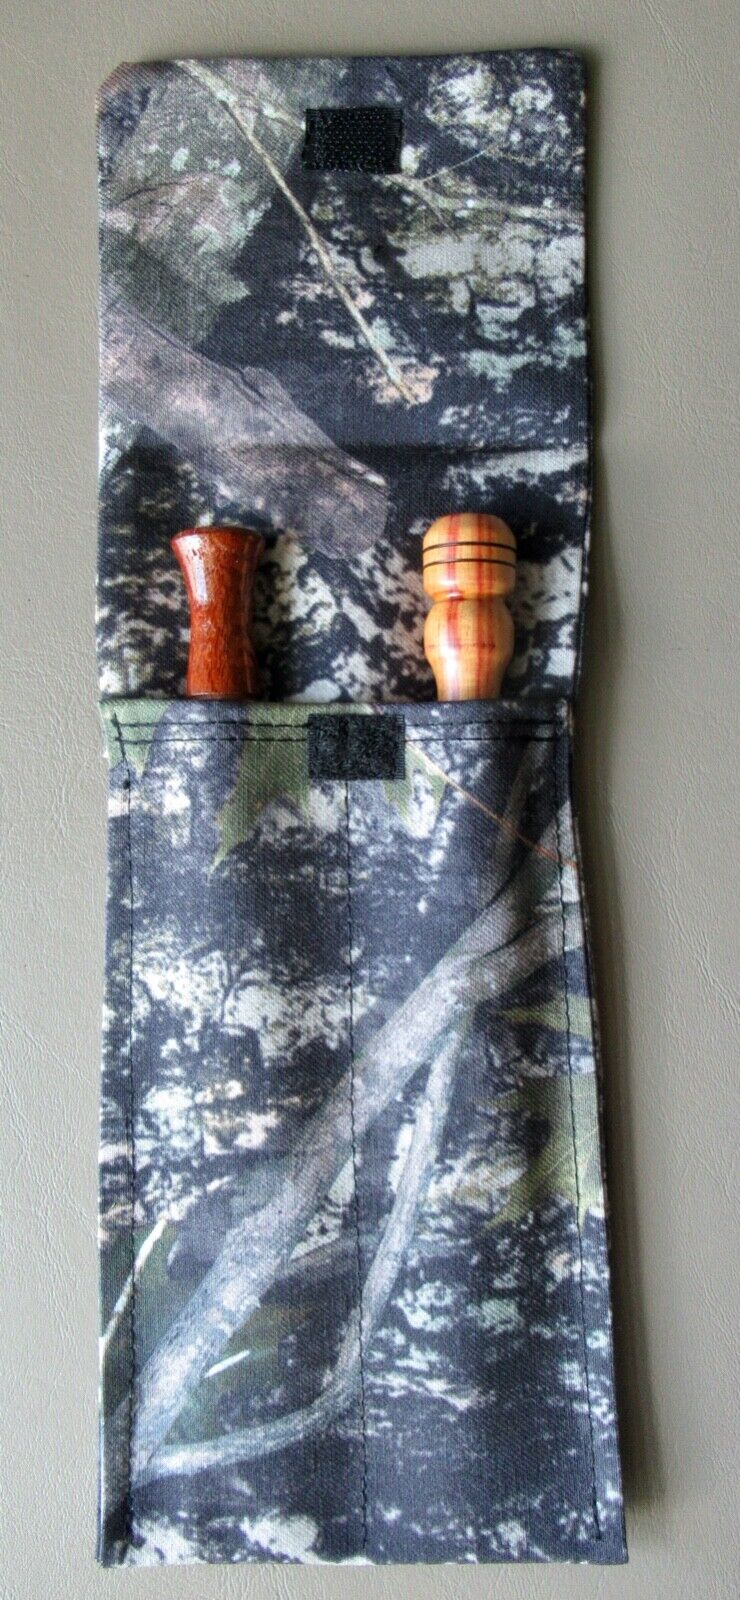 Turkey Hunting Pot Call Striker Pouch, Holds 2 Strikers (strikers Not Included)